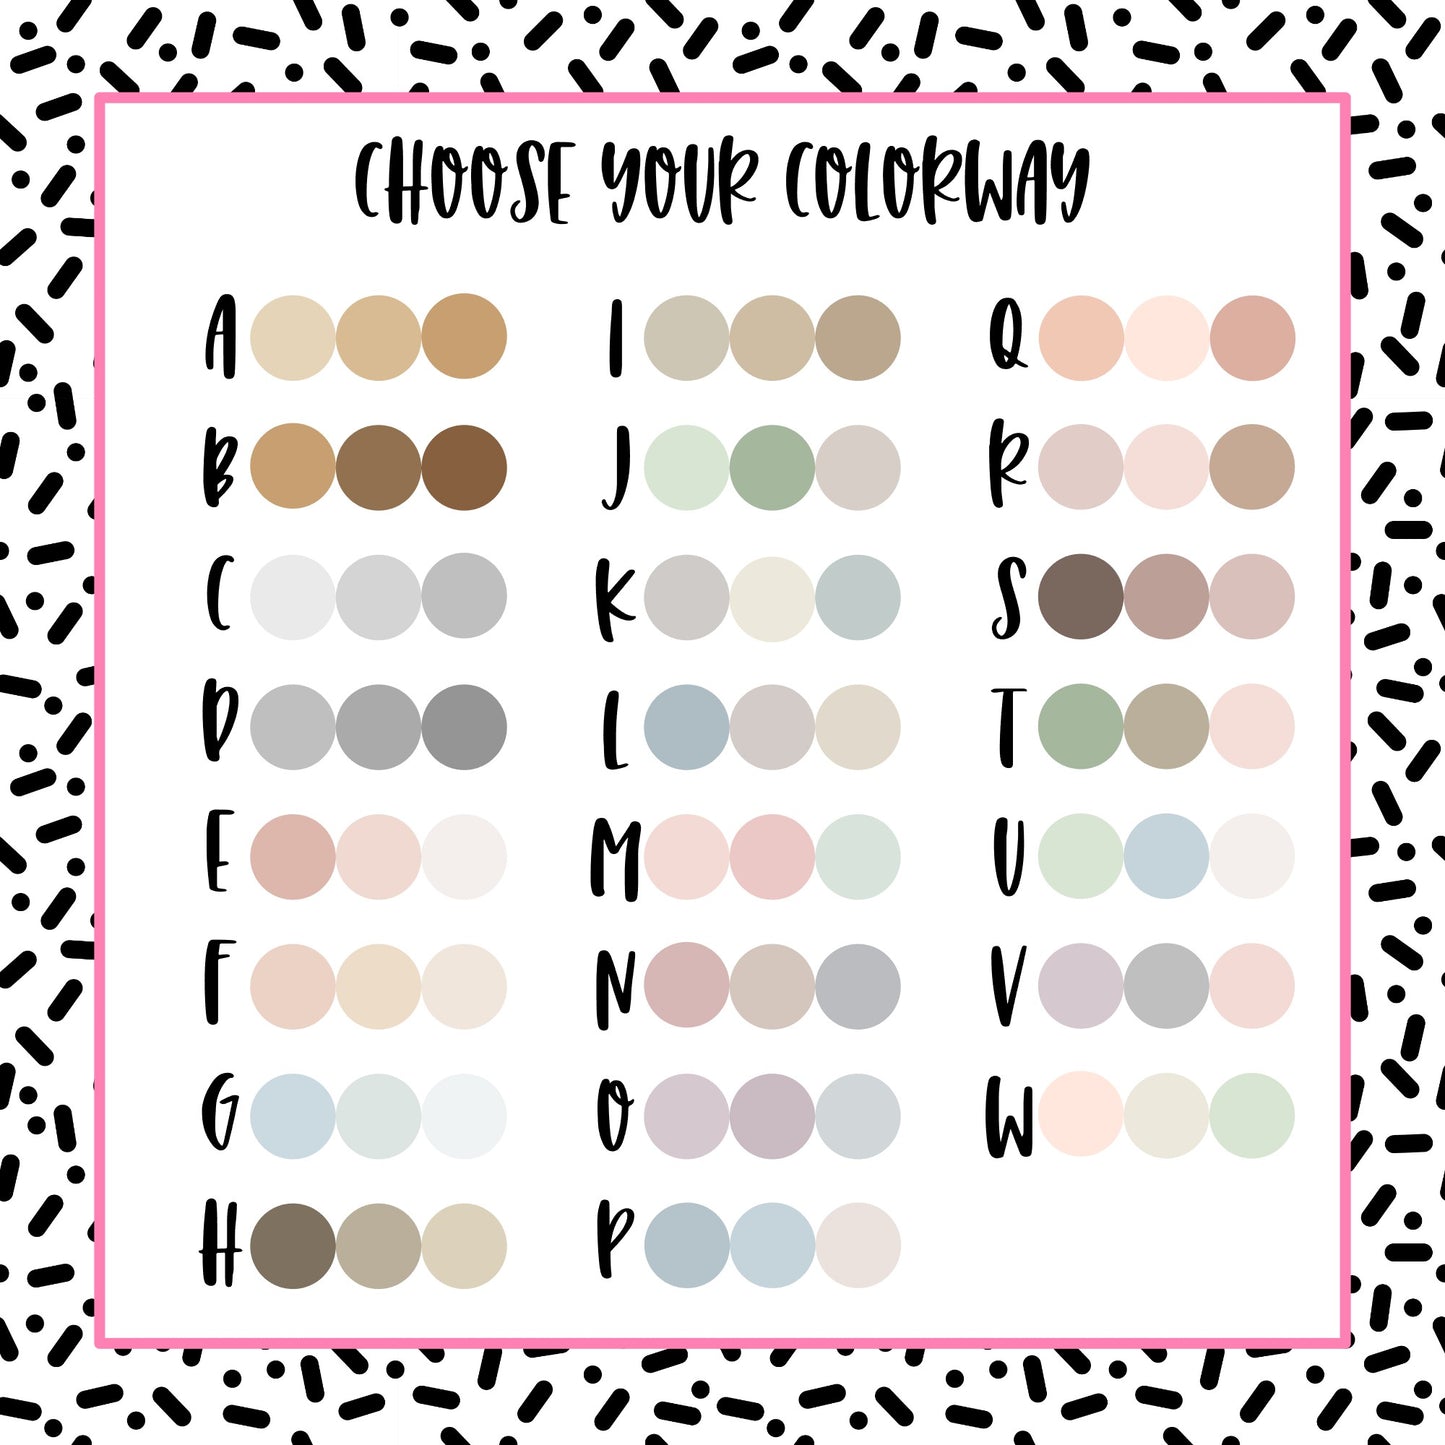 Neutral Clipped Grid Boxes LARGE - 23 color options